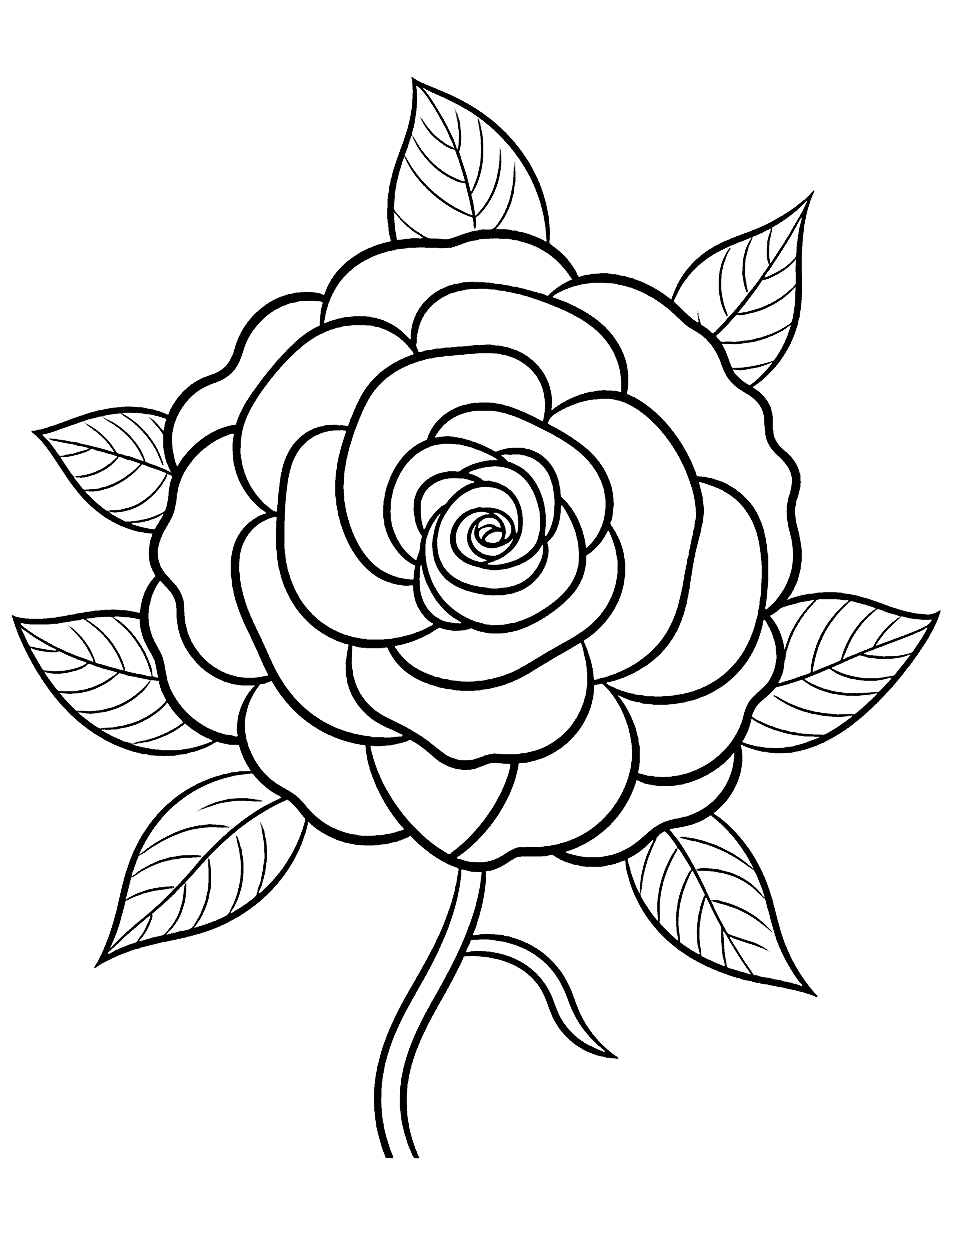 Stress Relief with Rose Mandala Flower Coloring Page - A complex rose mandala designed for relaxation and stress relief.